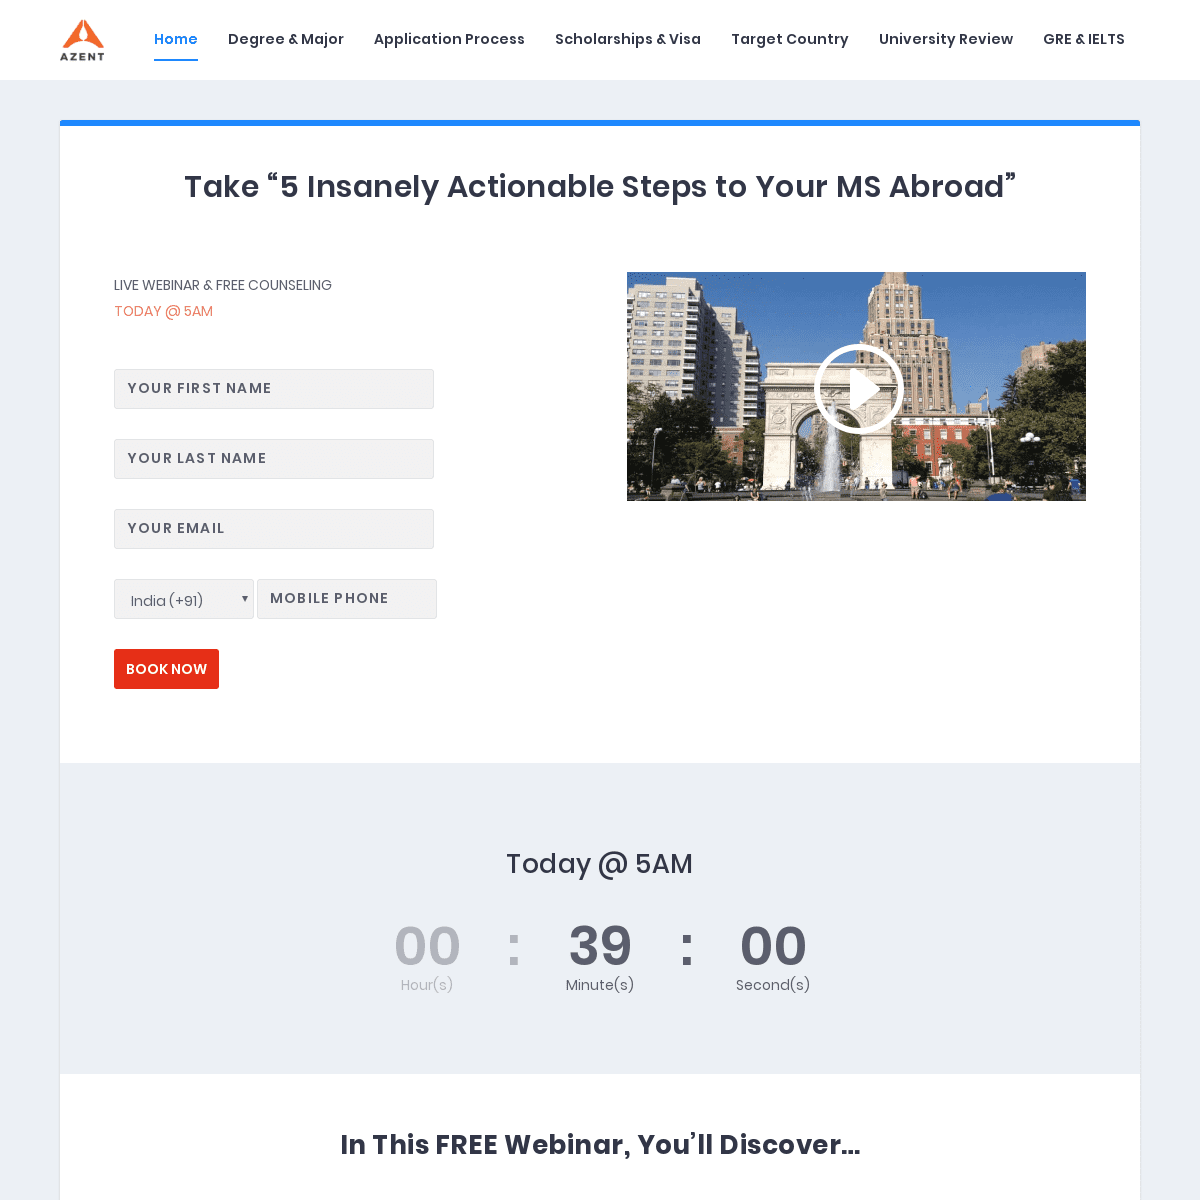 A complete backup of admissiontable.com